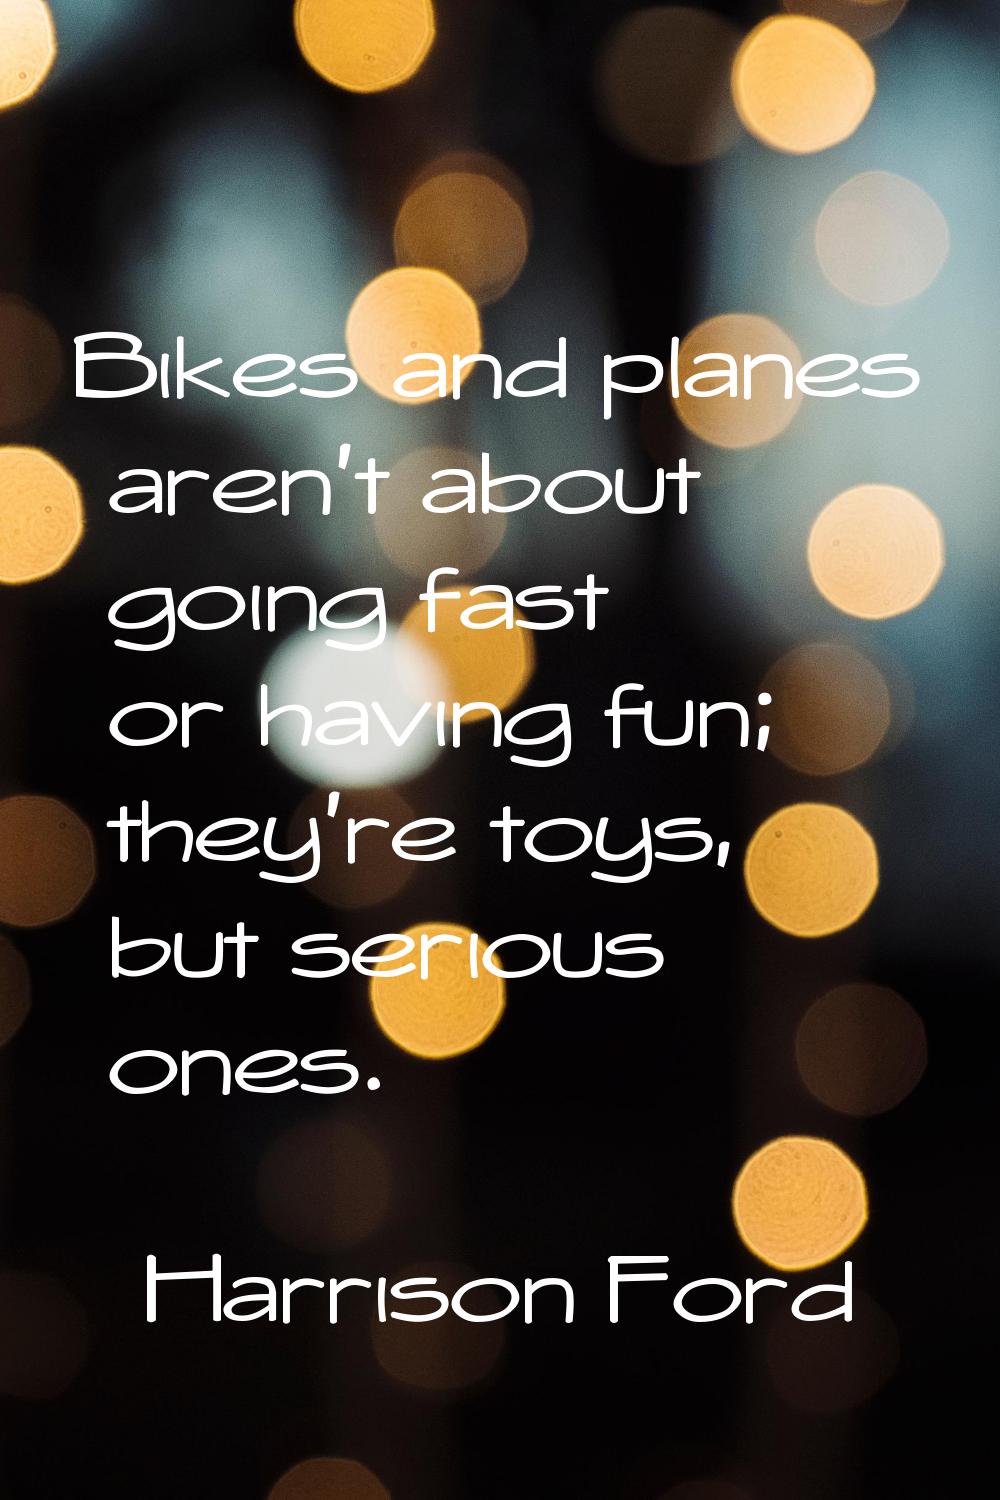 Bikes and planes aren't about going fast or having fun; they're toys, but serious ones.